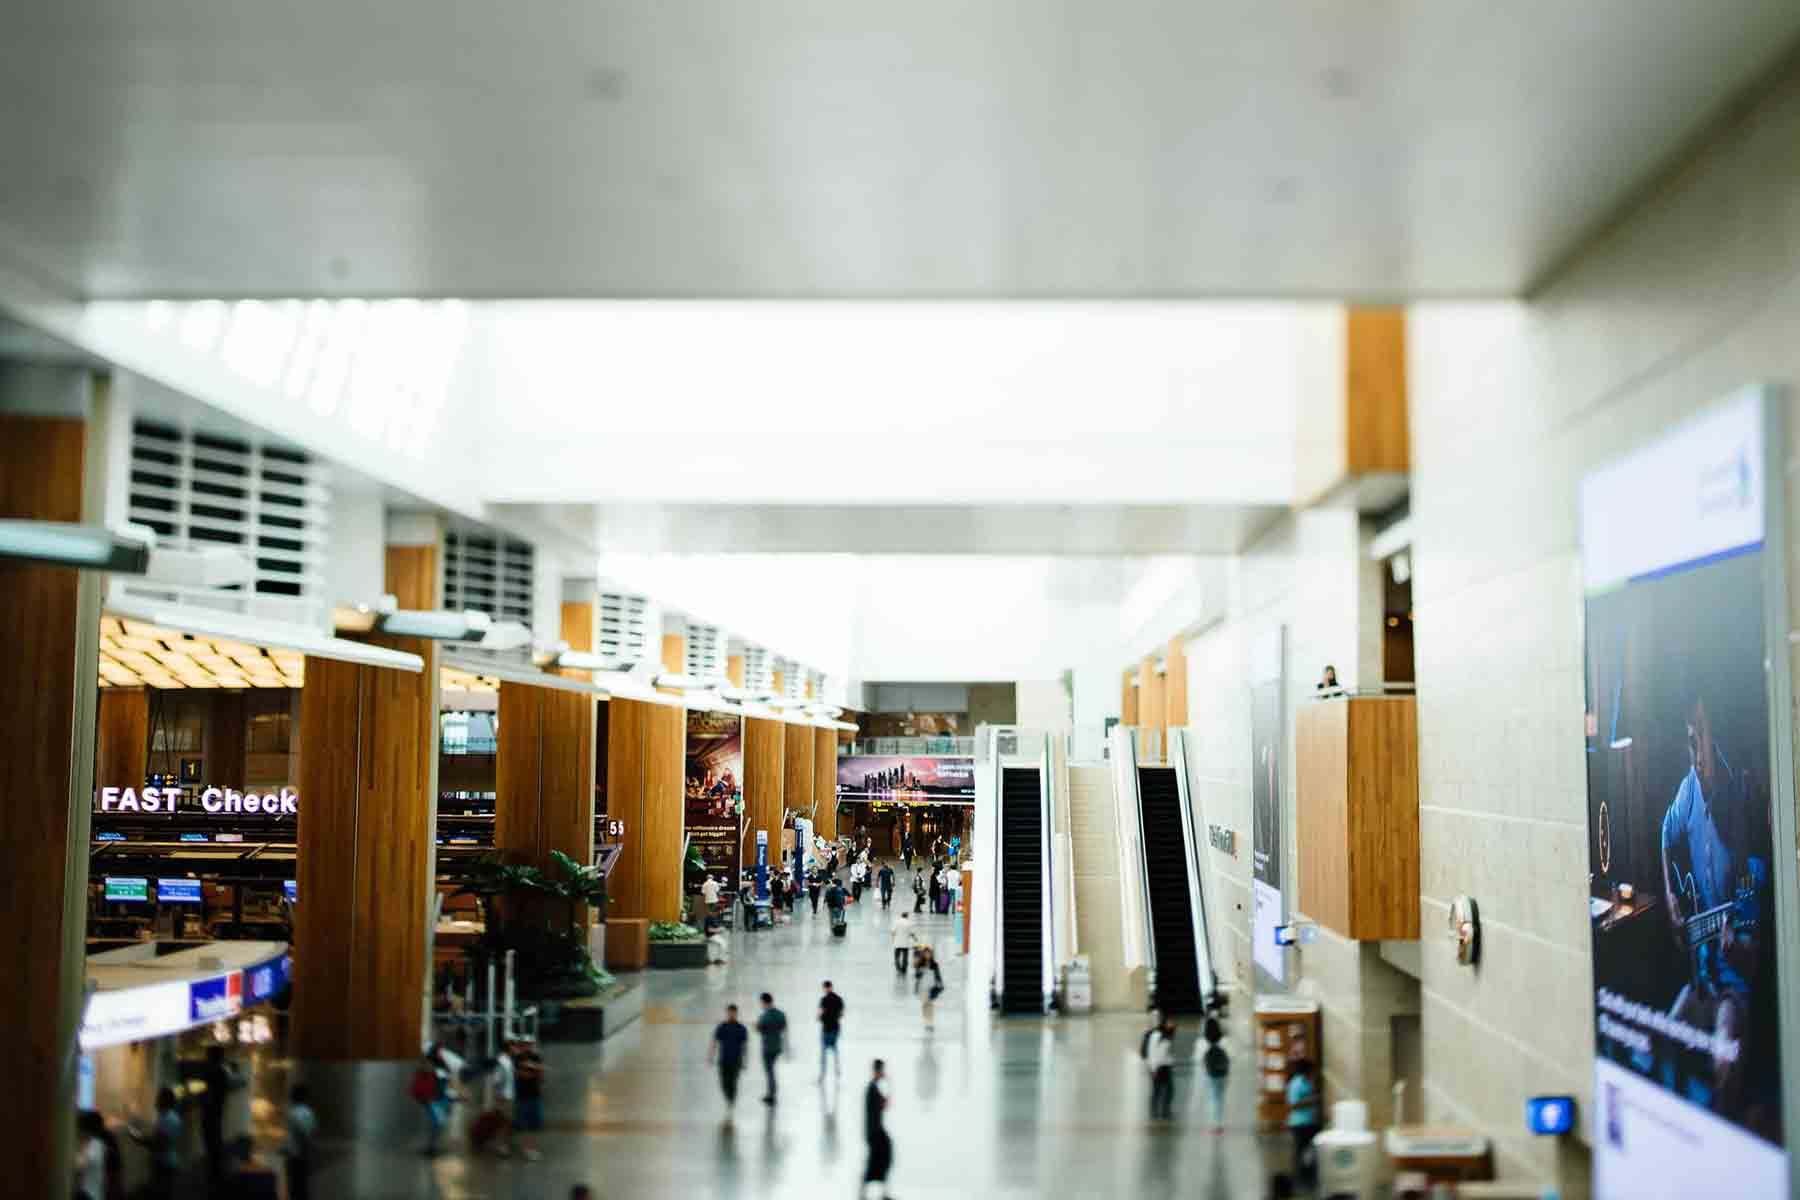 Busy airport interior